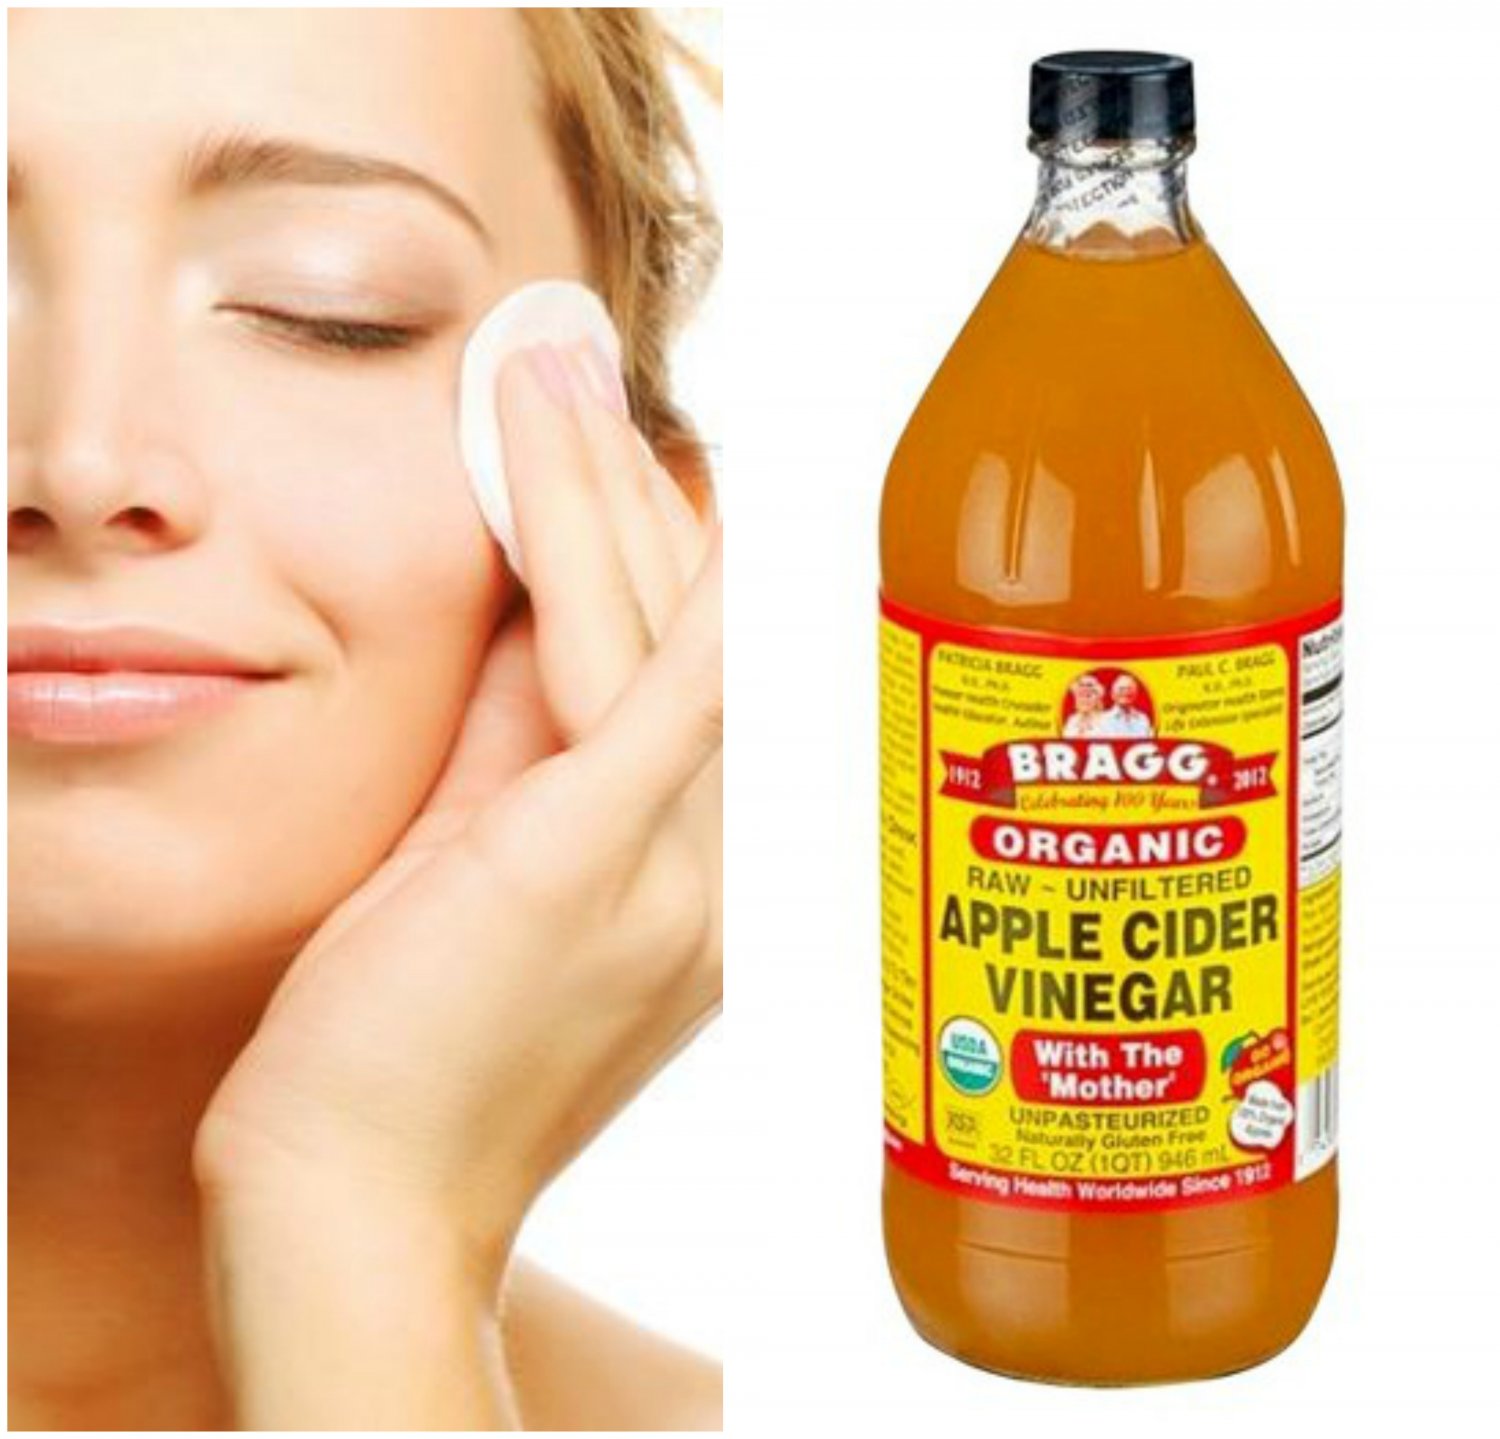 5 Steps To Get Flawless Skin Using ACV